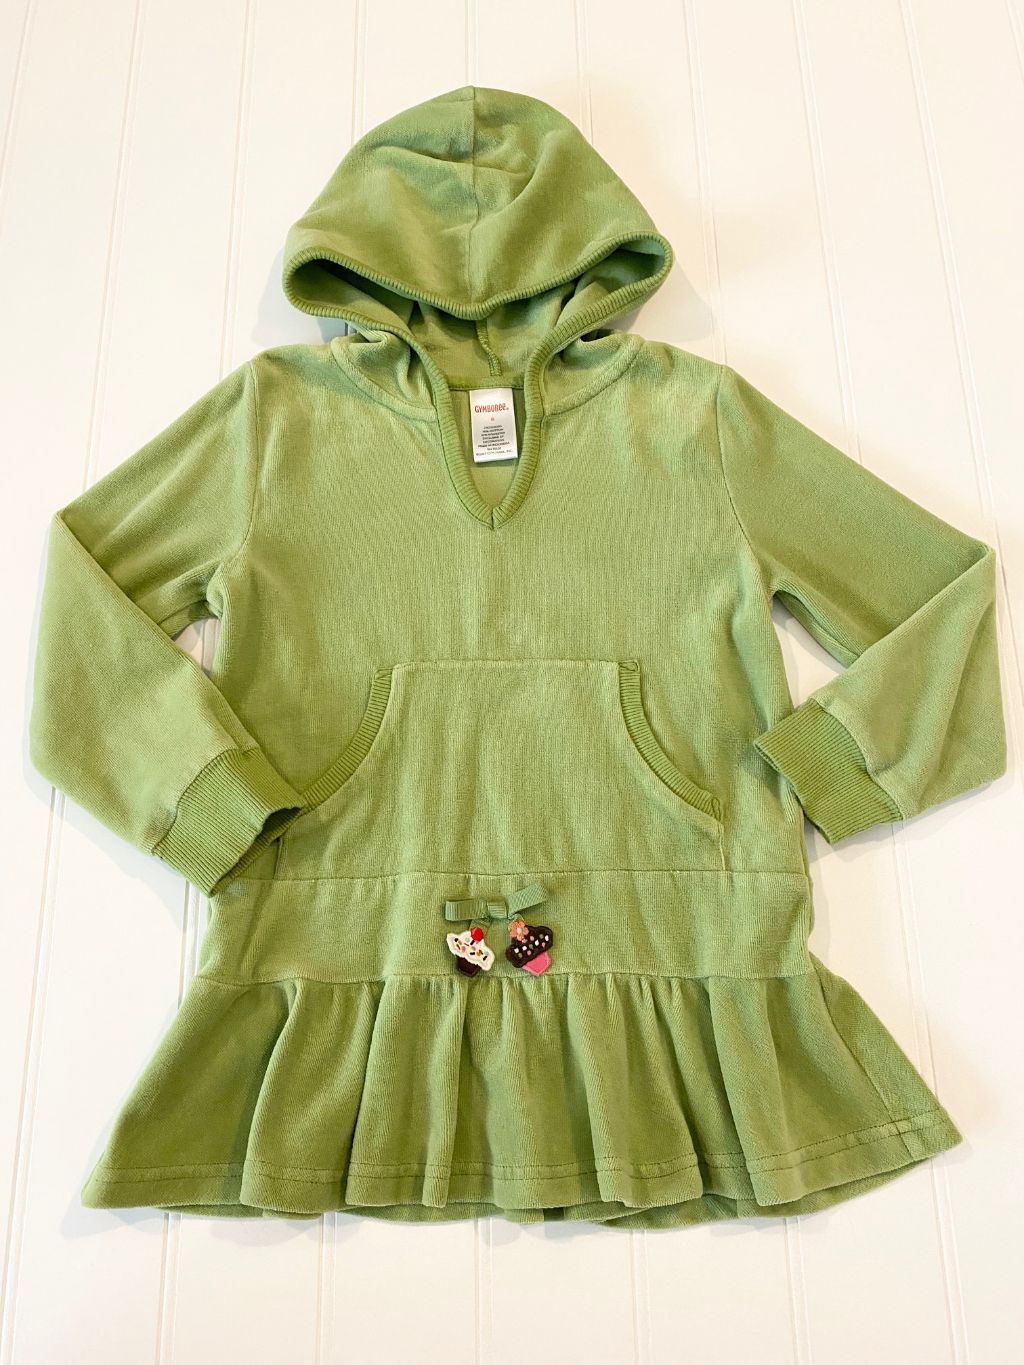 Pre-Loved Girls Gymboree Hooded Velour Tunic Top Size 6